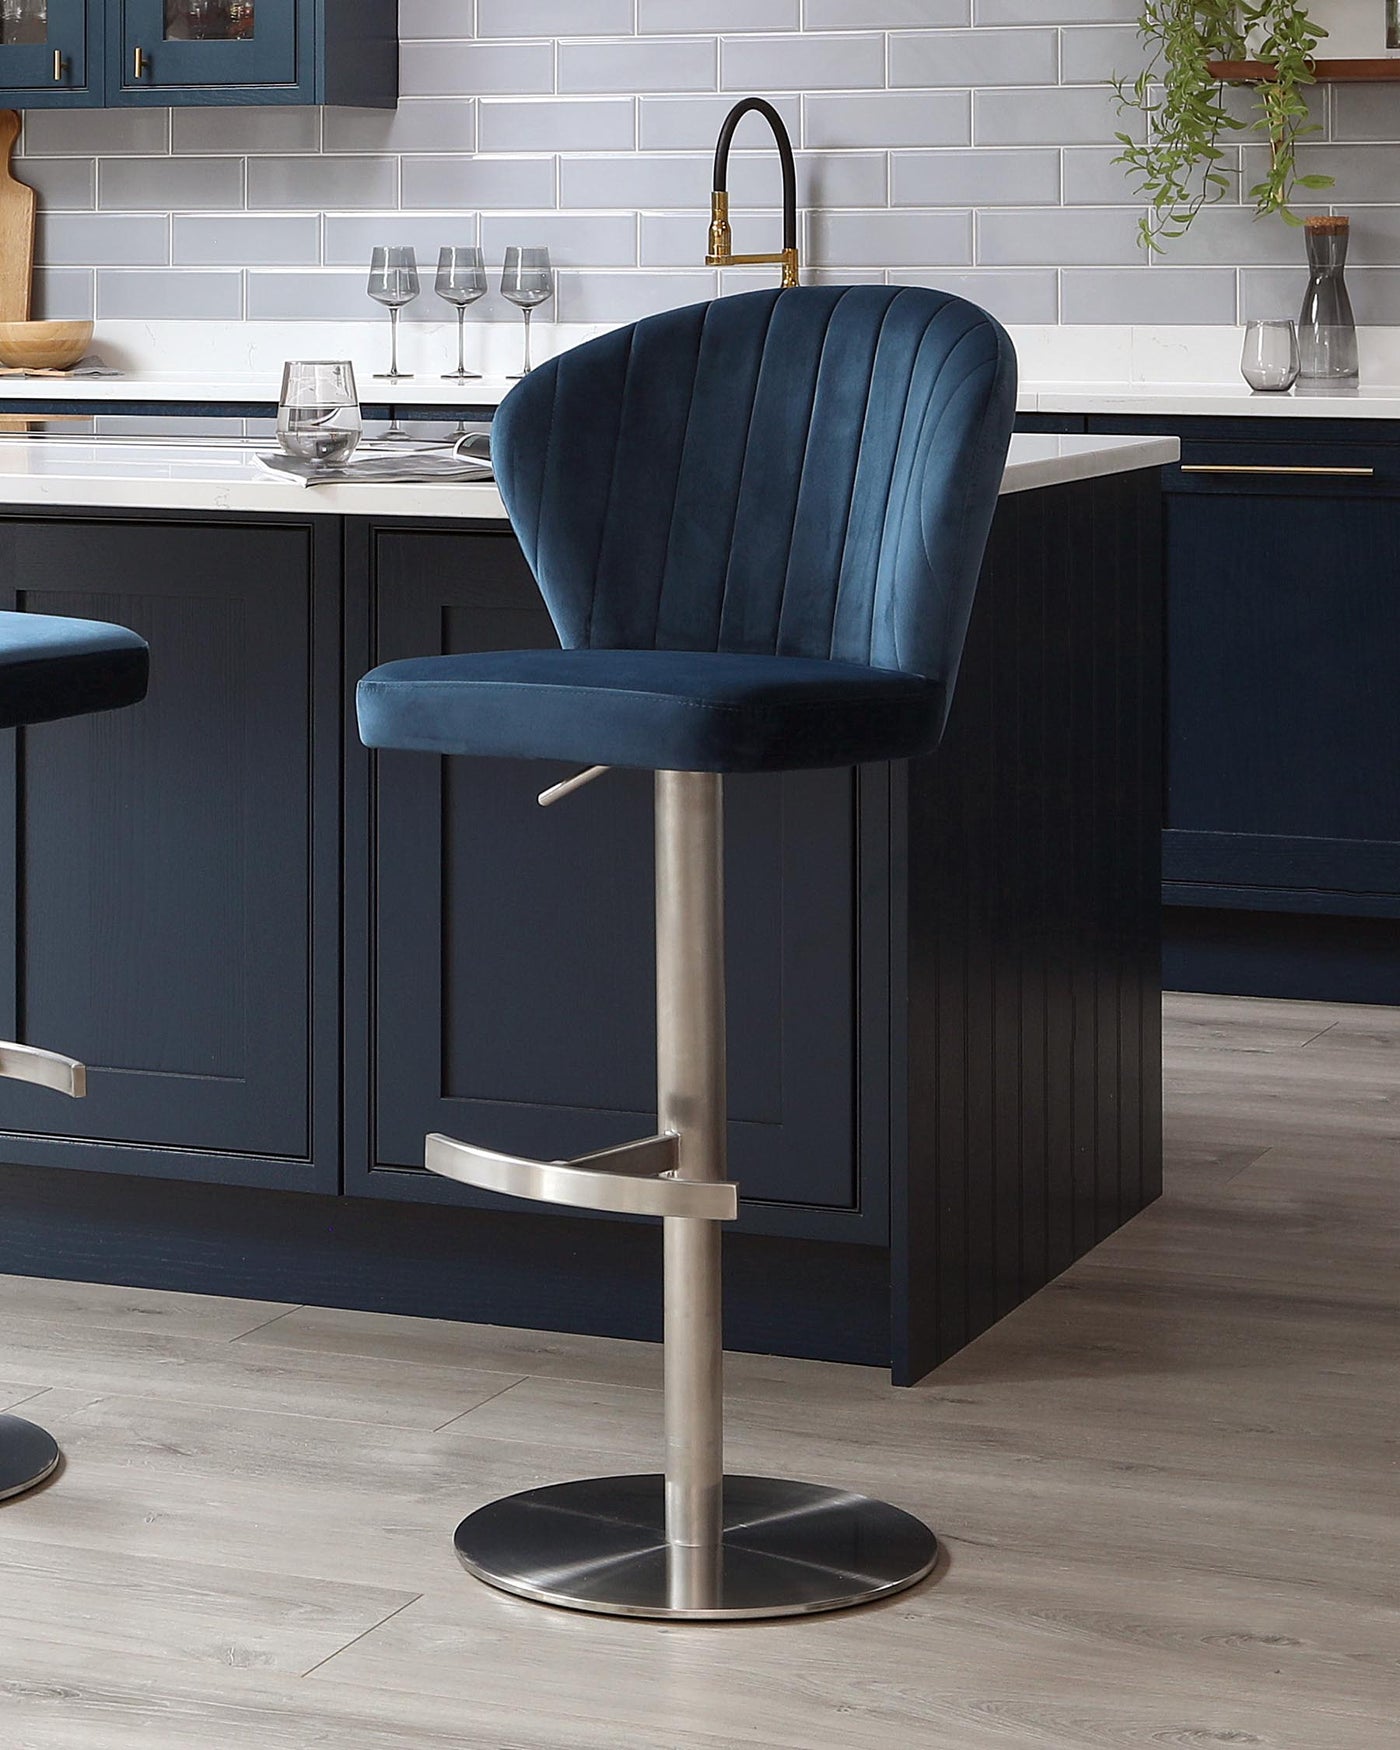 Elegant navy blue velvet bar stool featuring a curved backrest with vertical channel tufting and a sleek chrome pedestal base with a footrest and adjustable height mechanism.